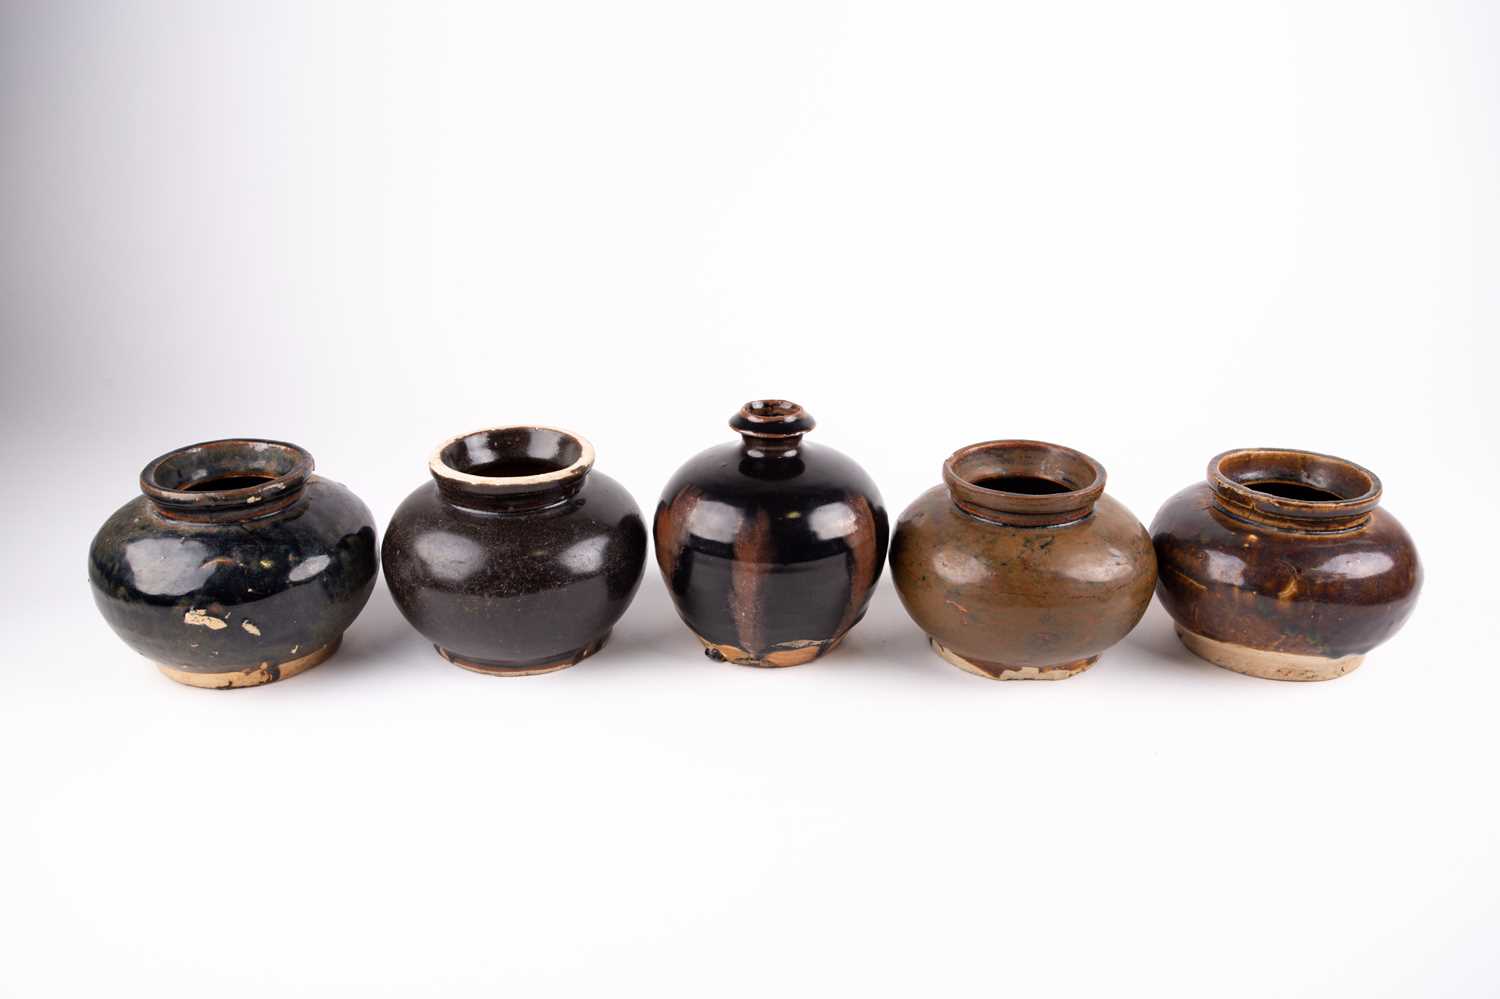 Five Chinese Henan jarlets, with various brown to black glazes, one with a short neck and